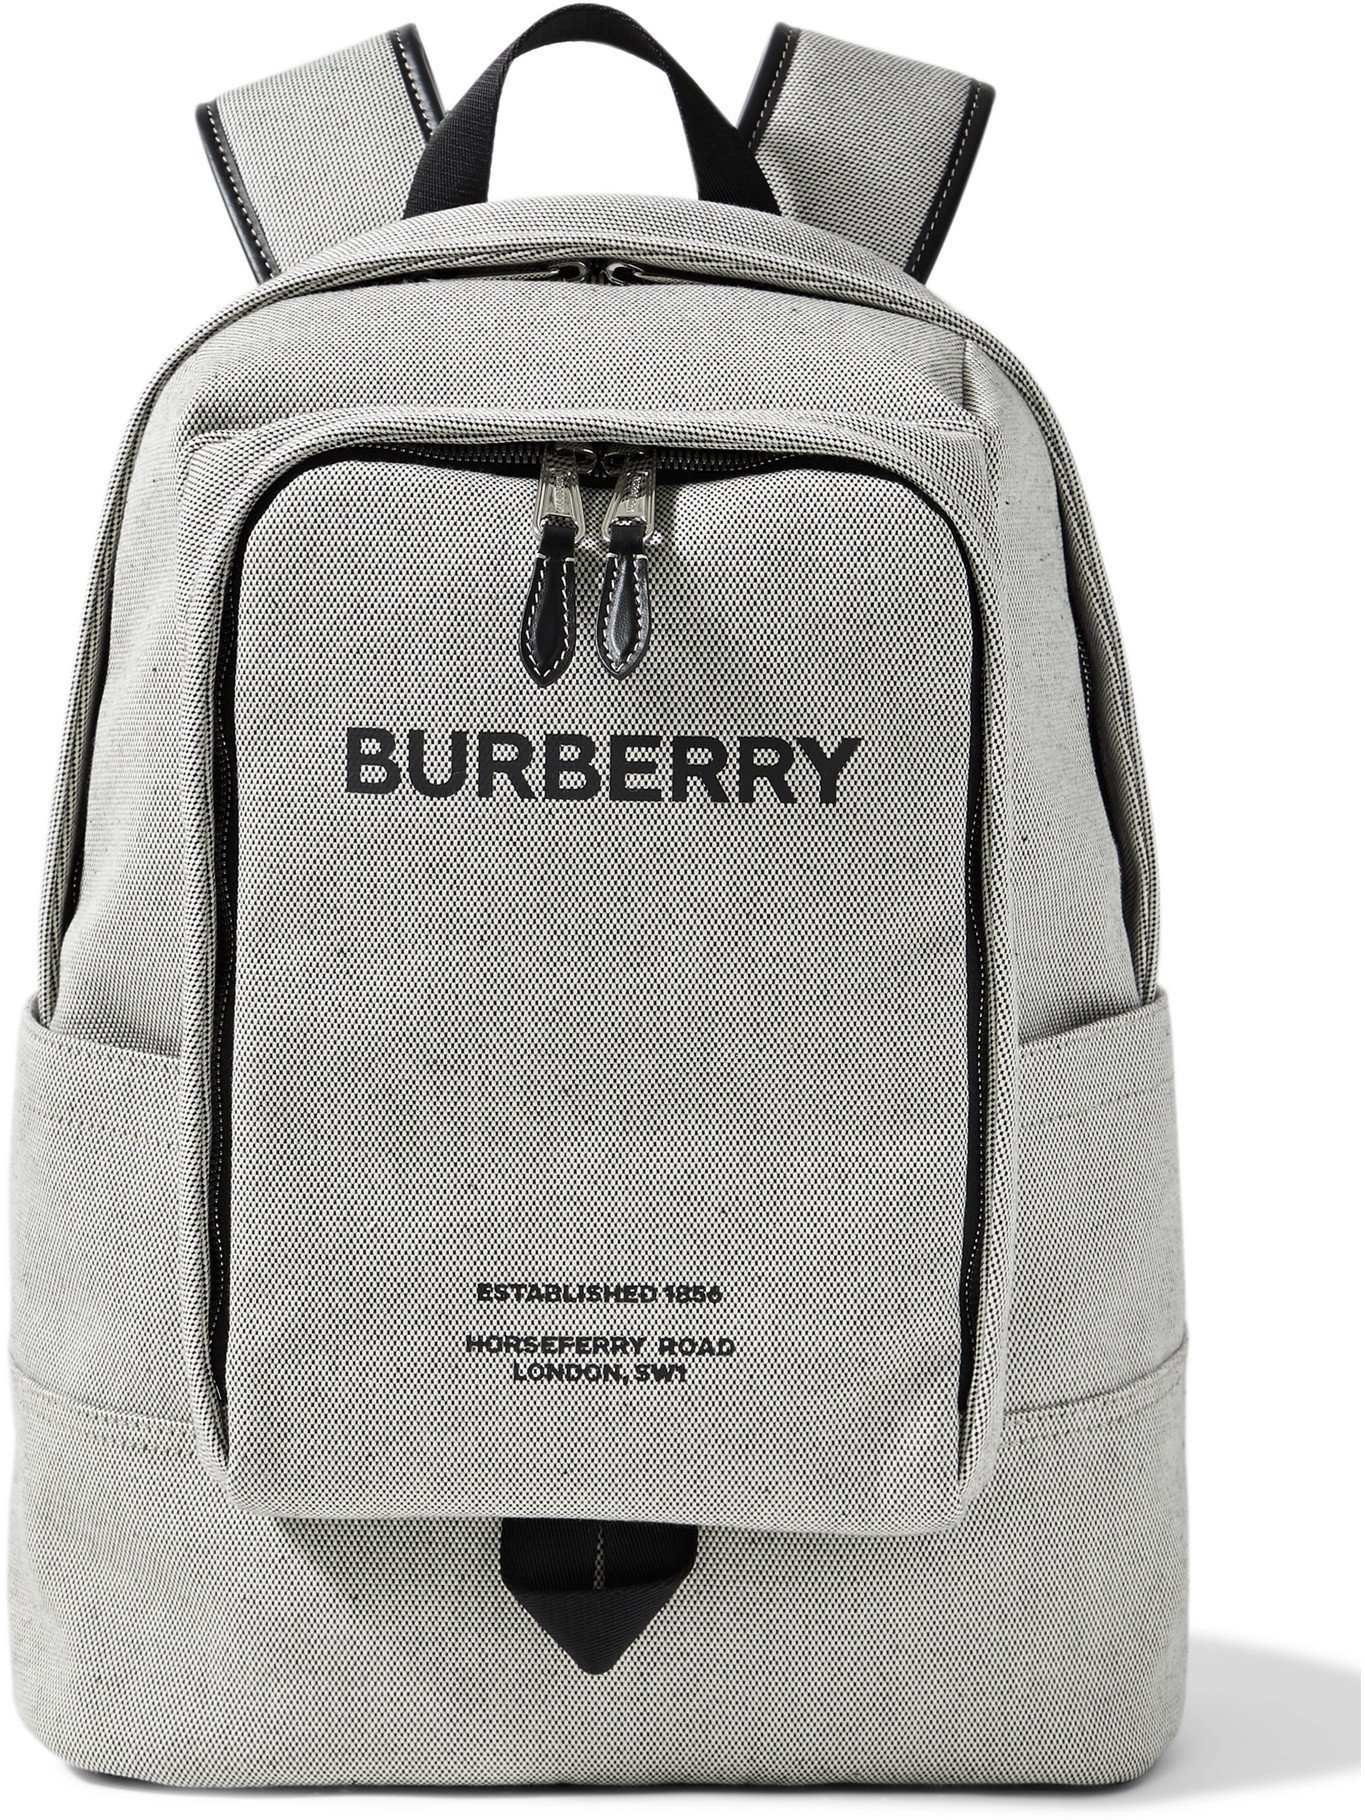 BURBERRY - Logo-Print Leather-Trimmed Canvas Backpack Burberry